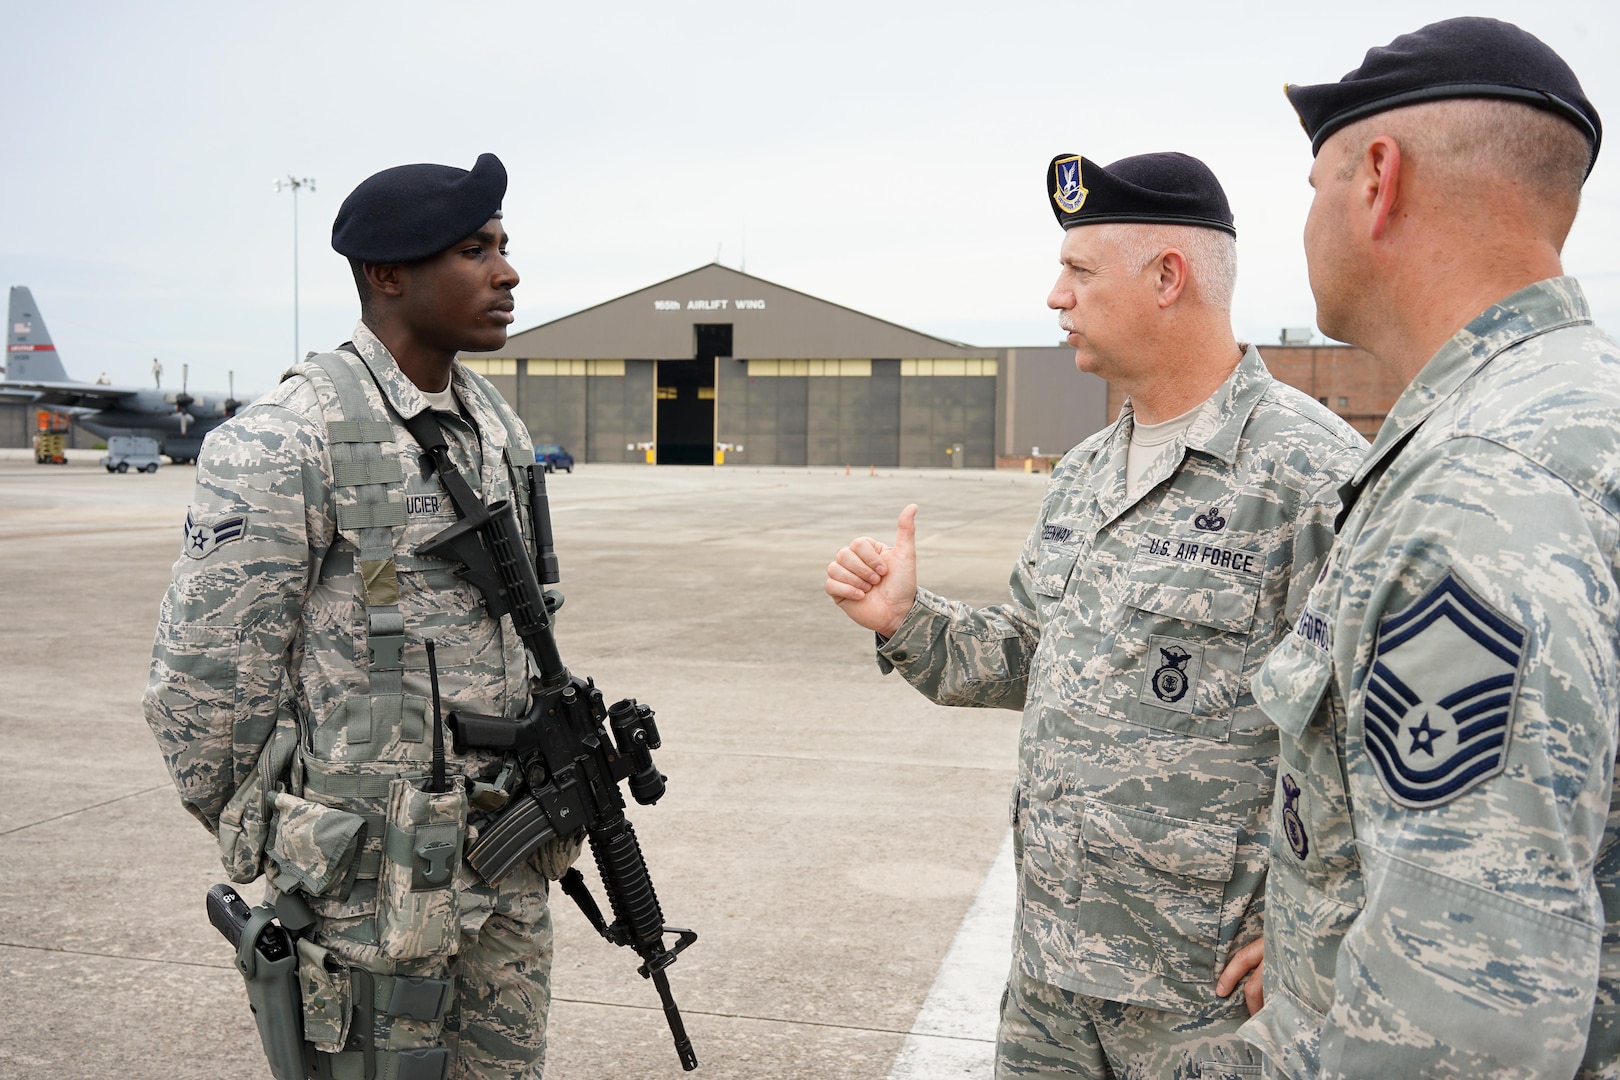 U.S. Air Force Chief Master Sgt. William Greenway, center, 116th Security Forces Squadron (SFS) Manager, questions Airman 1st Class Devajia Saucier, left, while Senior Master Sgt. James Miller, 116th SFS operations superintendent looks on, during a post briefing on the flightline at Joint Base Savannah, Ga., June 23, 2015. The JSTARS cops from the Georgia Air National Guard’s 116th Air Control Wing completed 15 days of law enforcement and flightline security training during their annual tour at Joint Base Savannah.